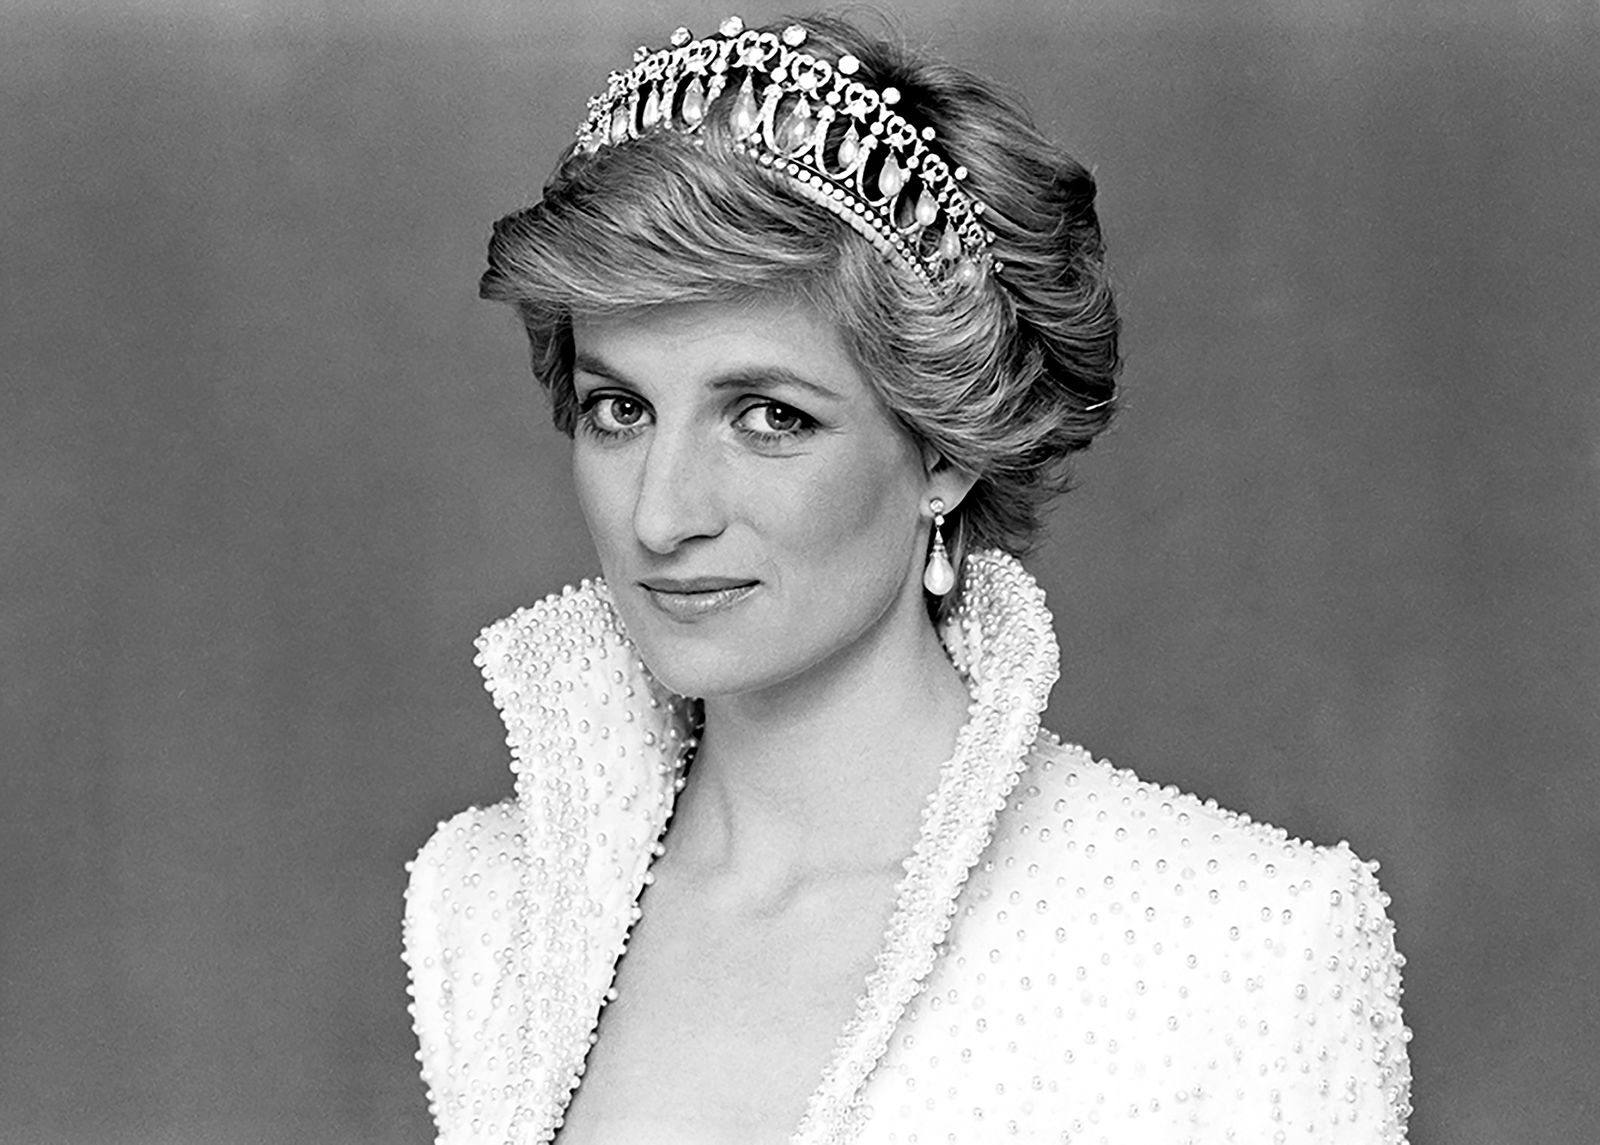 Princess Diana's Iconic Dress Sells for $1.1 Million at Auction ...